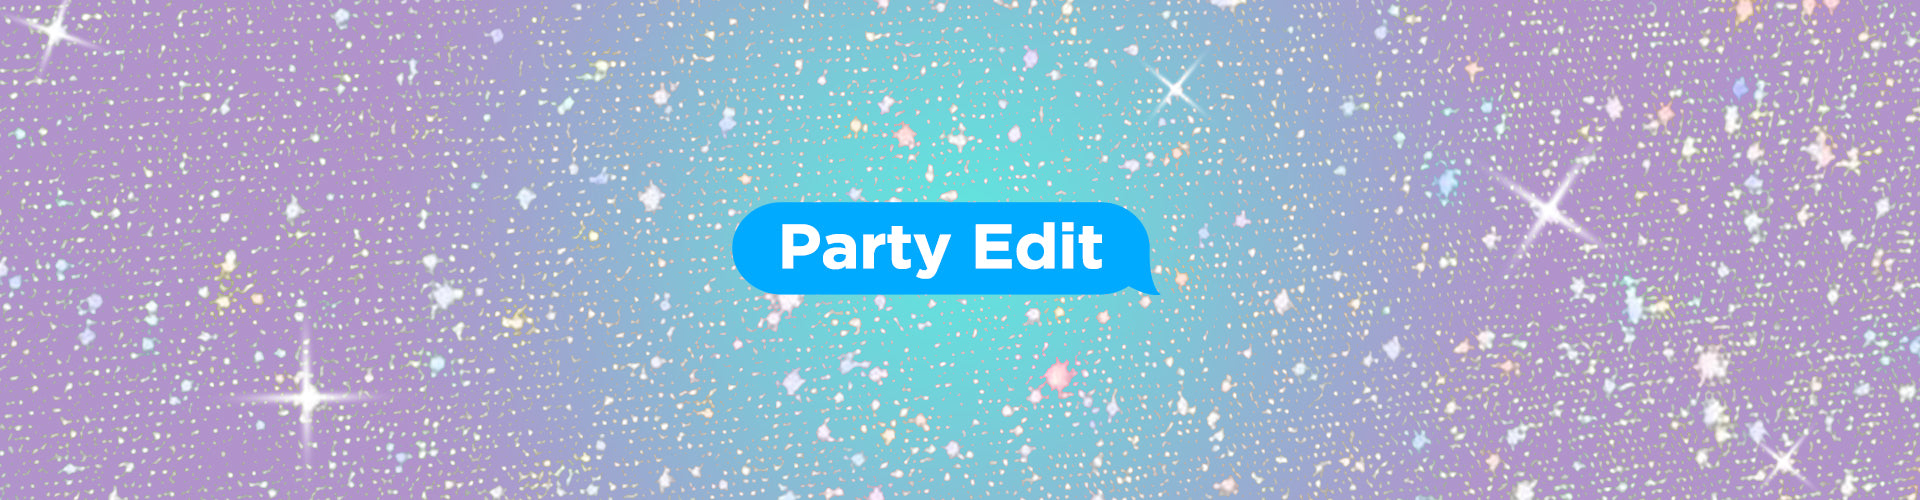 The Party Edit